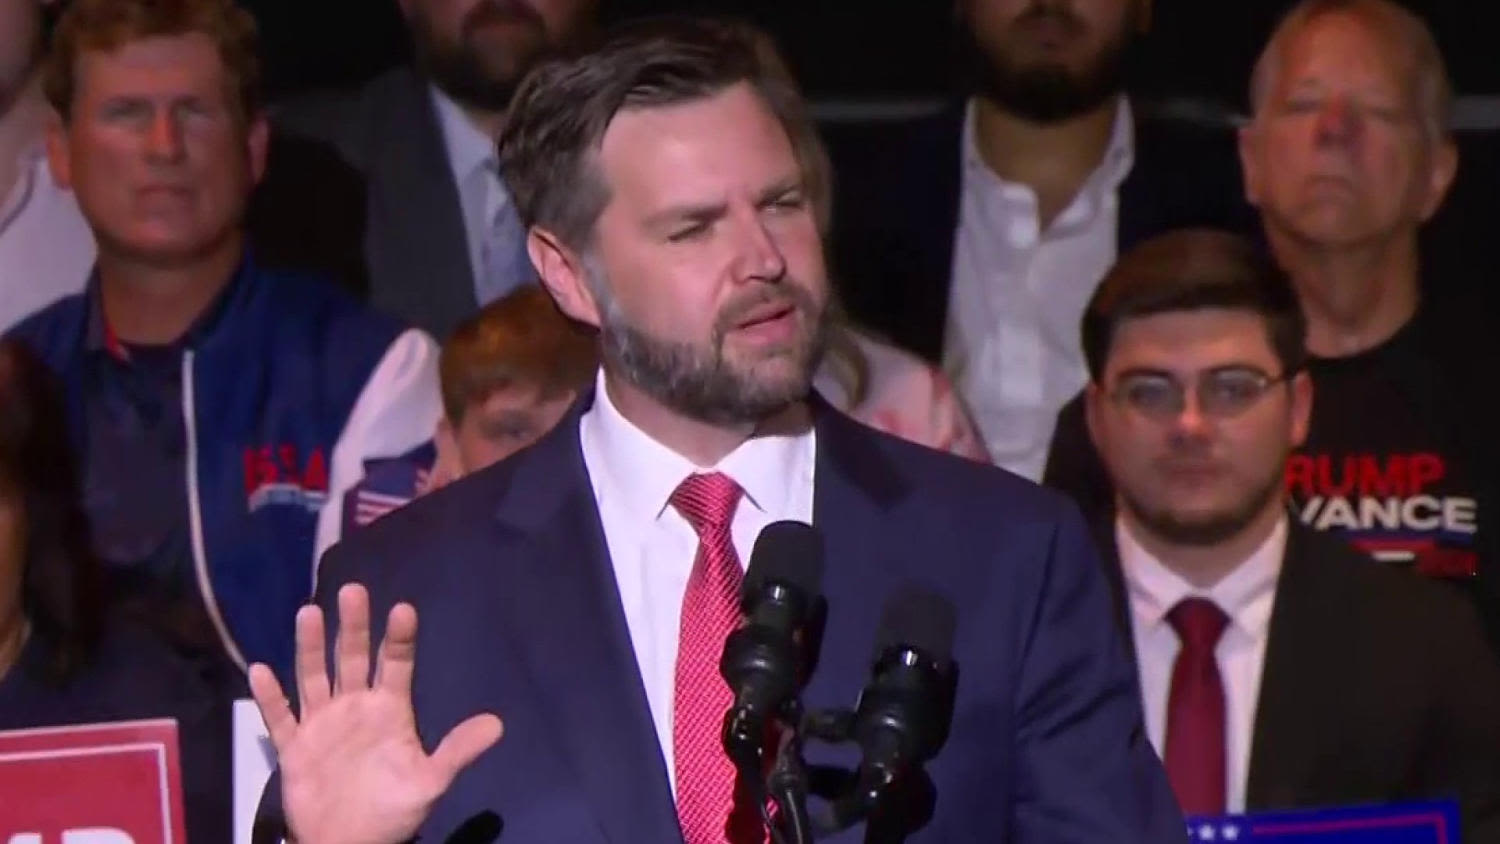 ‘Trump wanted him for his looks and now he’s stuck’: GOP now second guessing JD Vance choice for VP